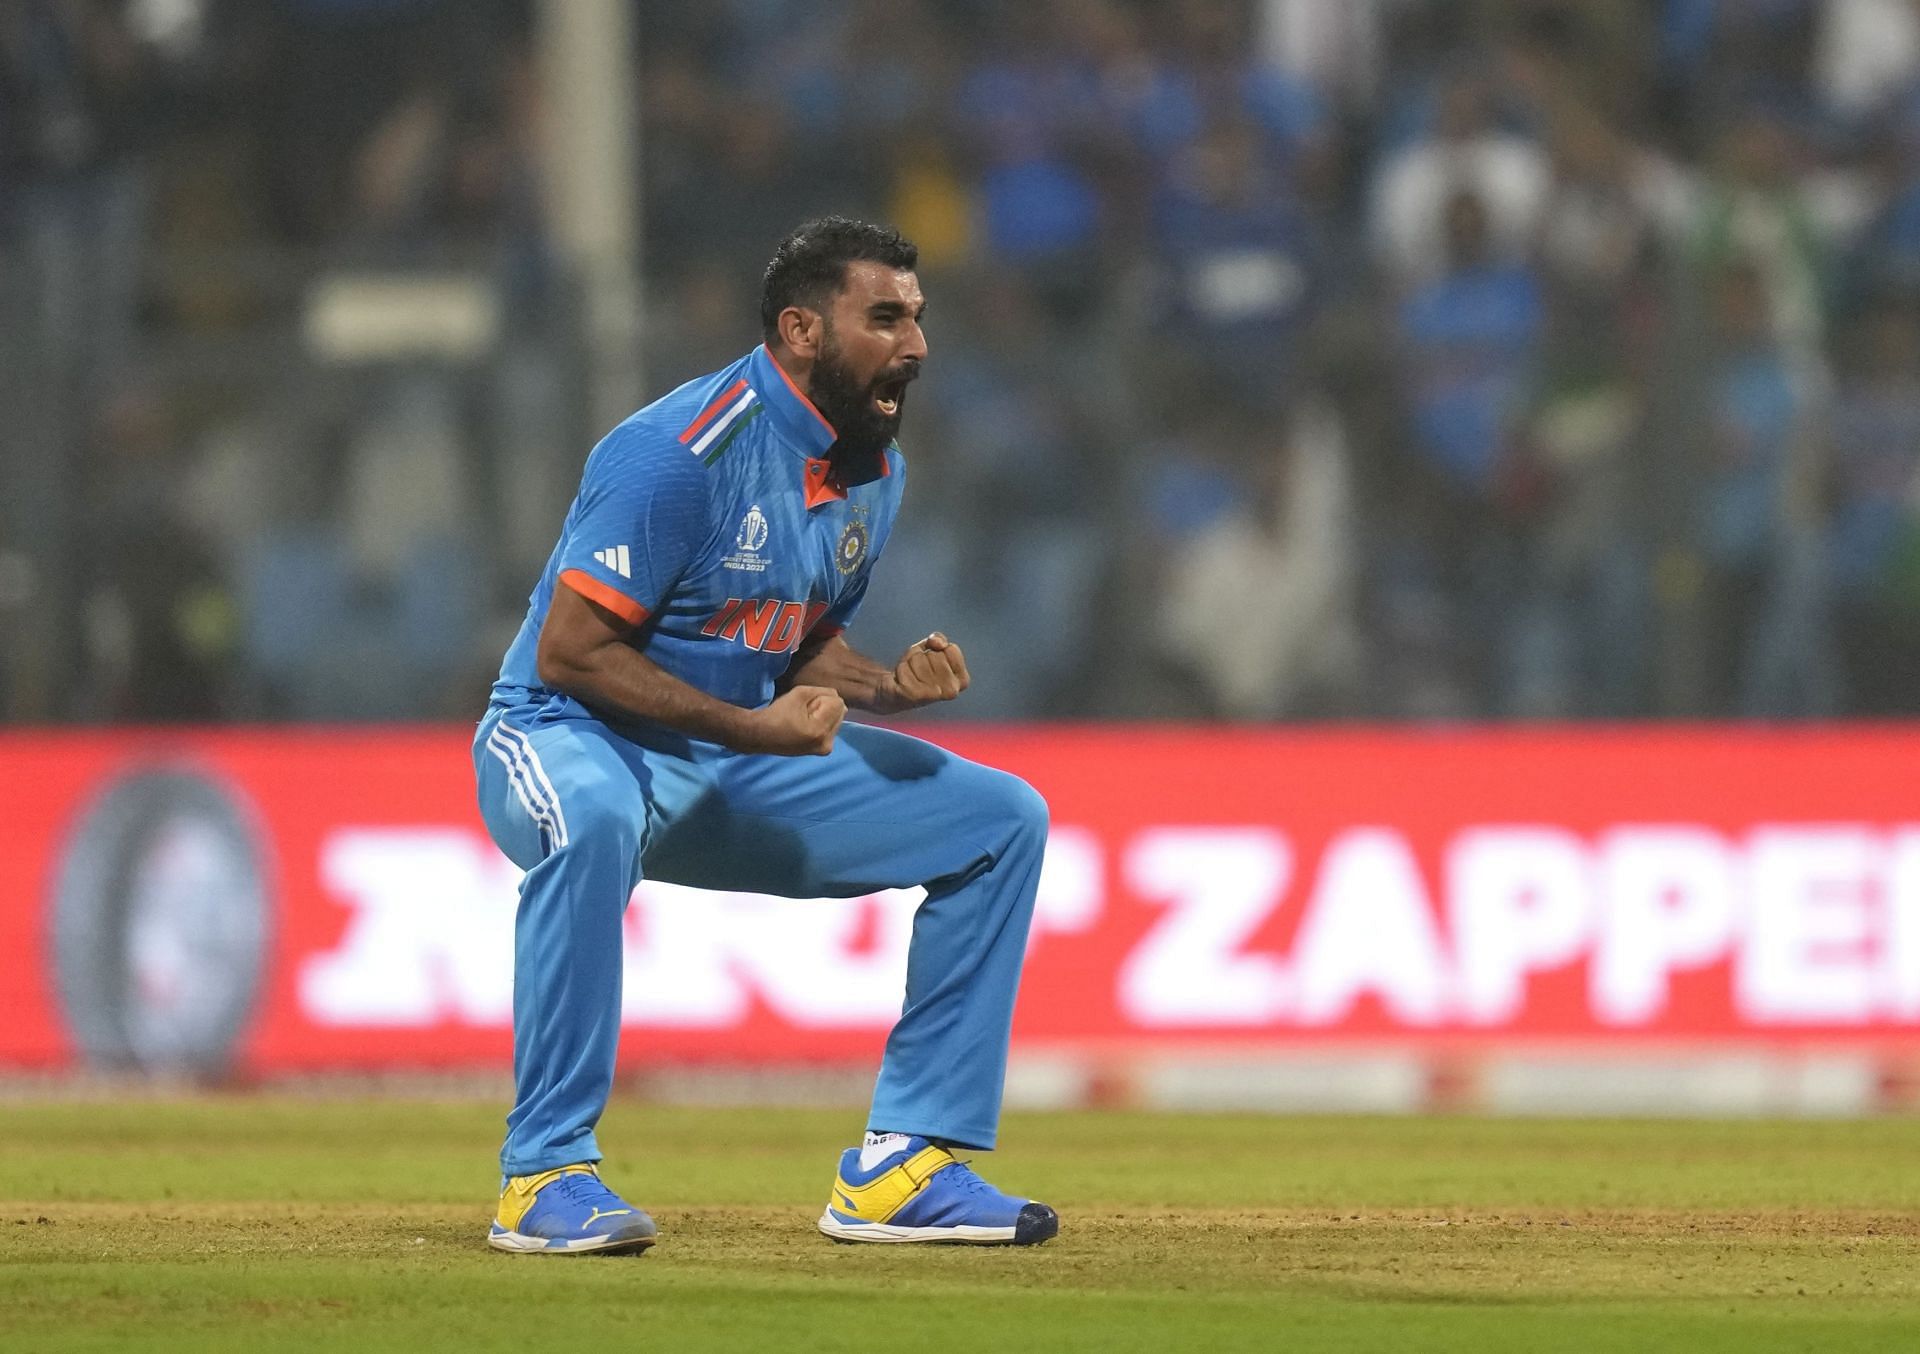 Mohammed Shami registered the best figures by an Indian bowler in ODI cricket. [P/C: AP]